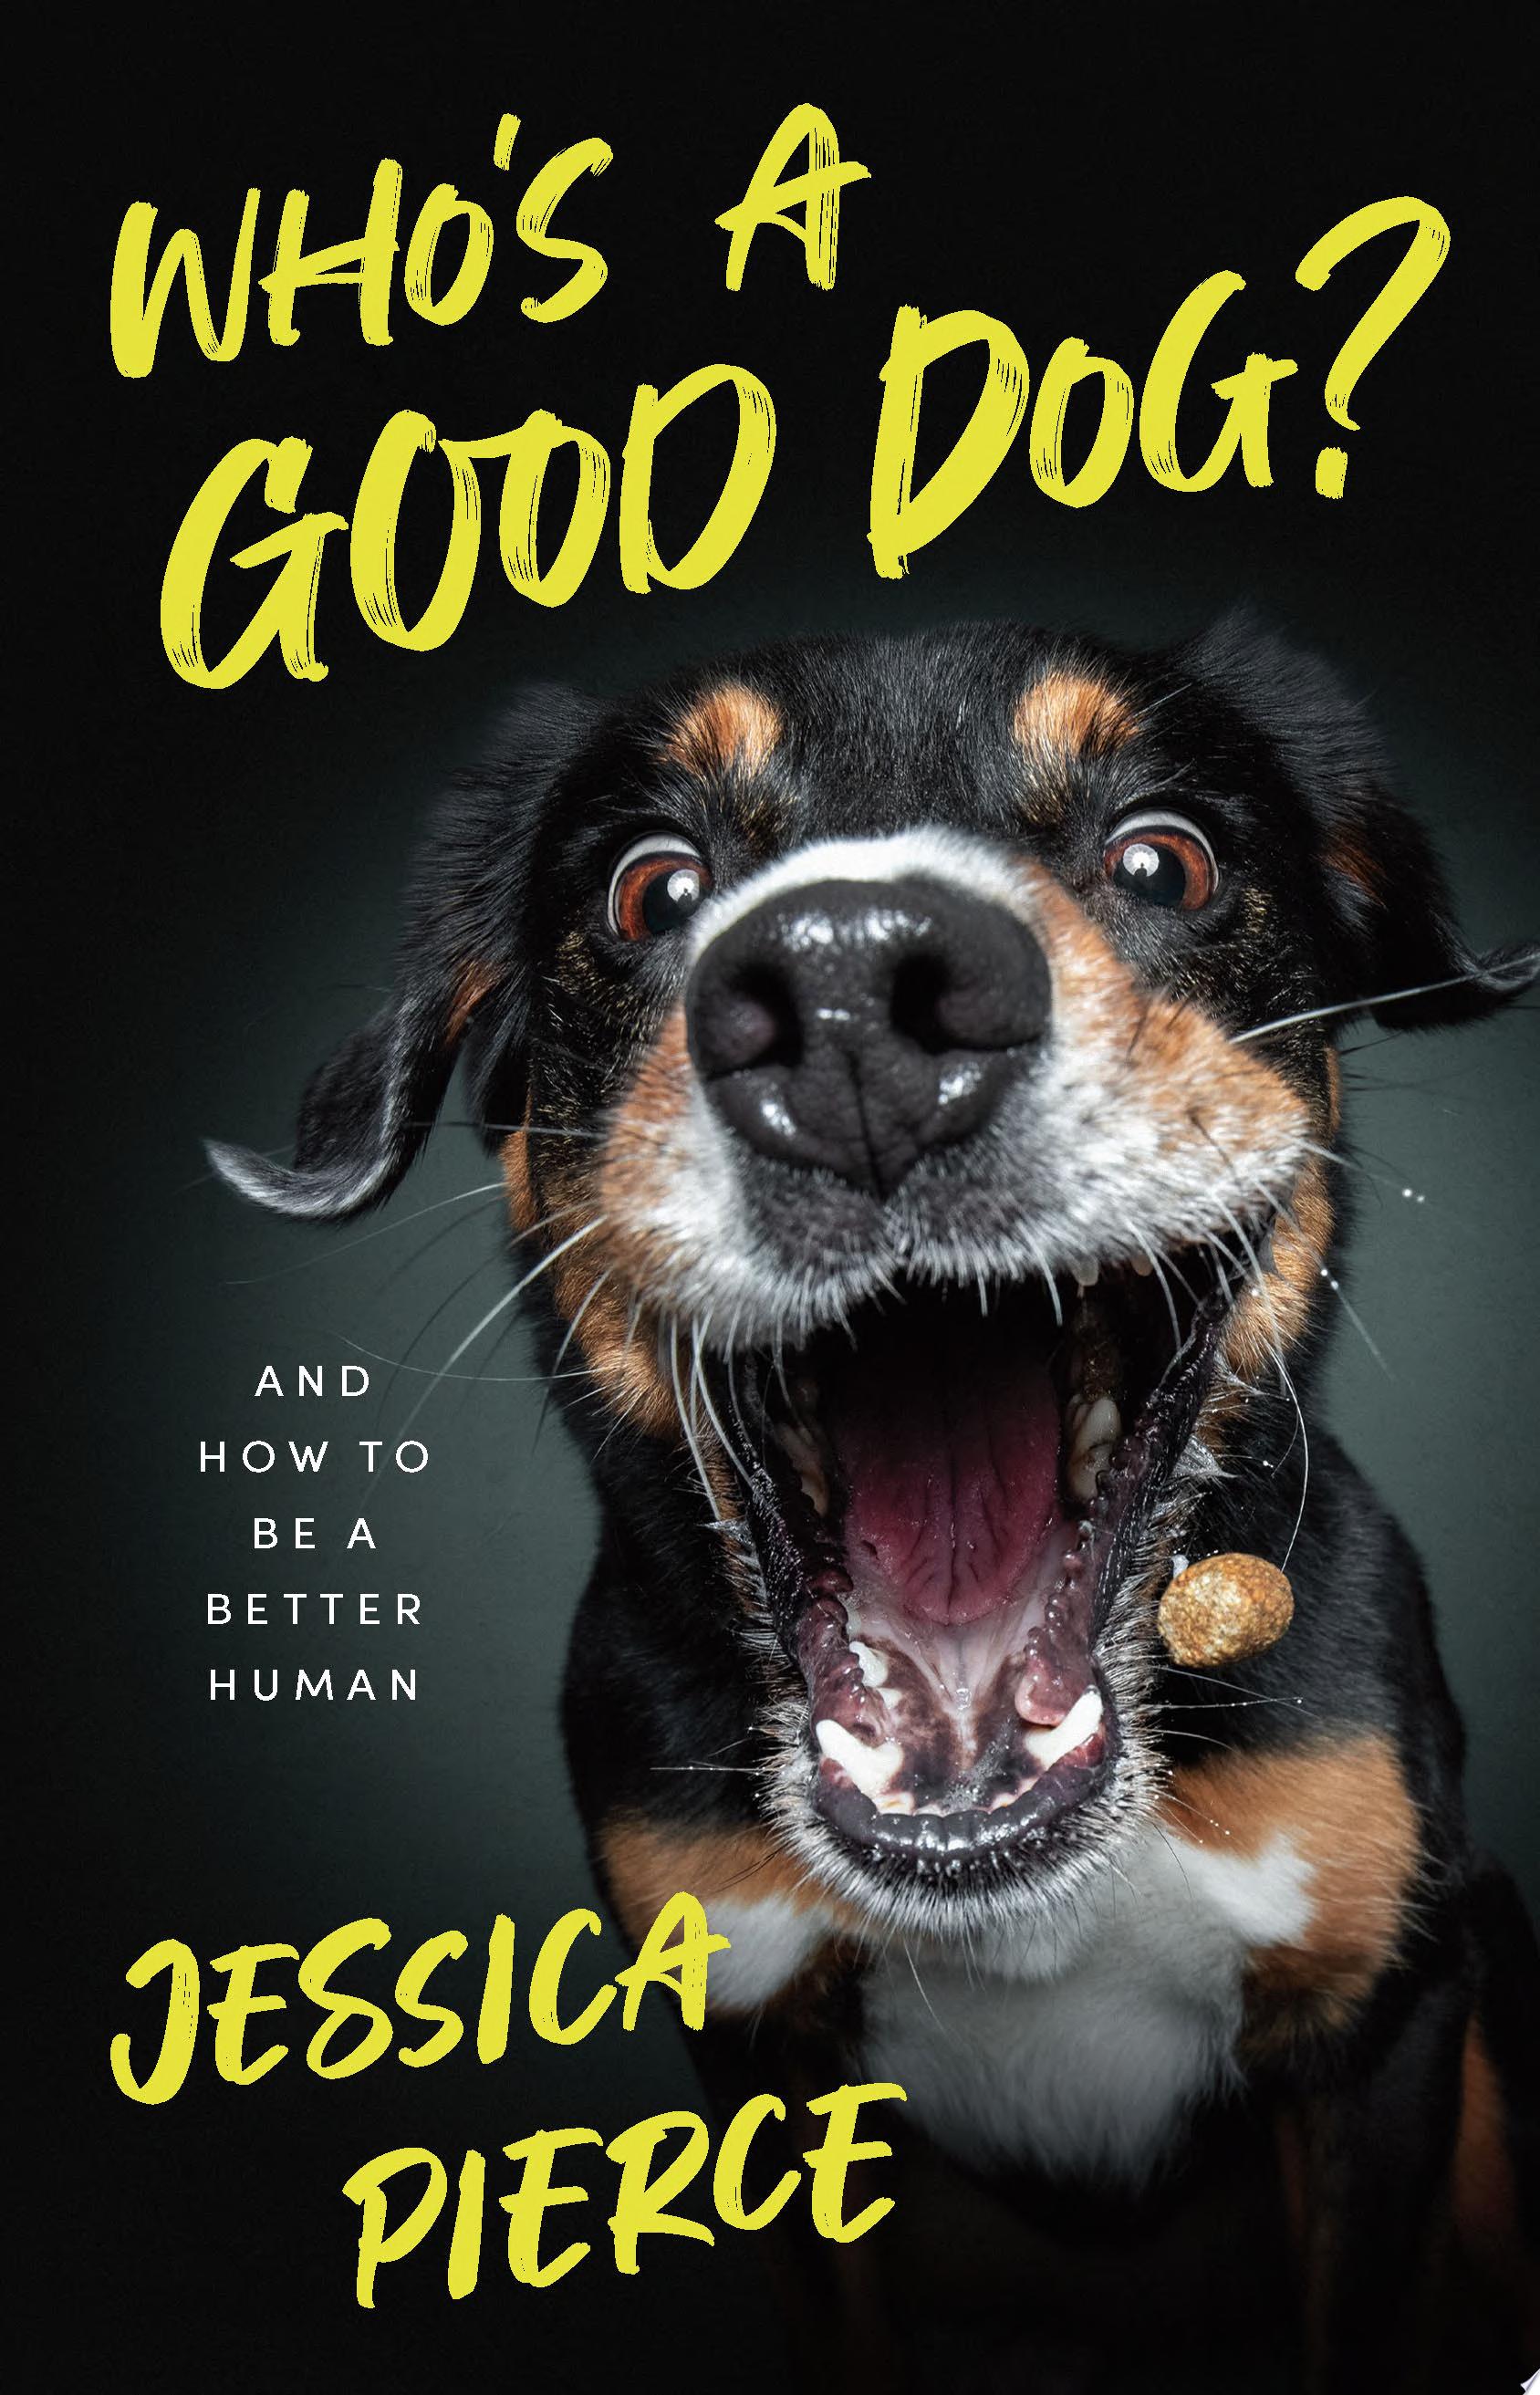 Image for "Who's a Good Dog?"